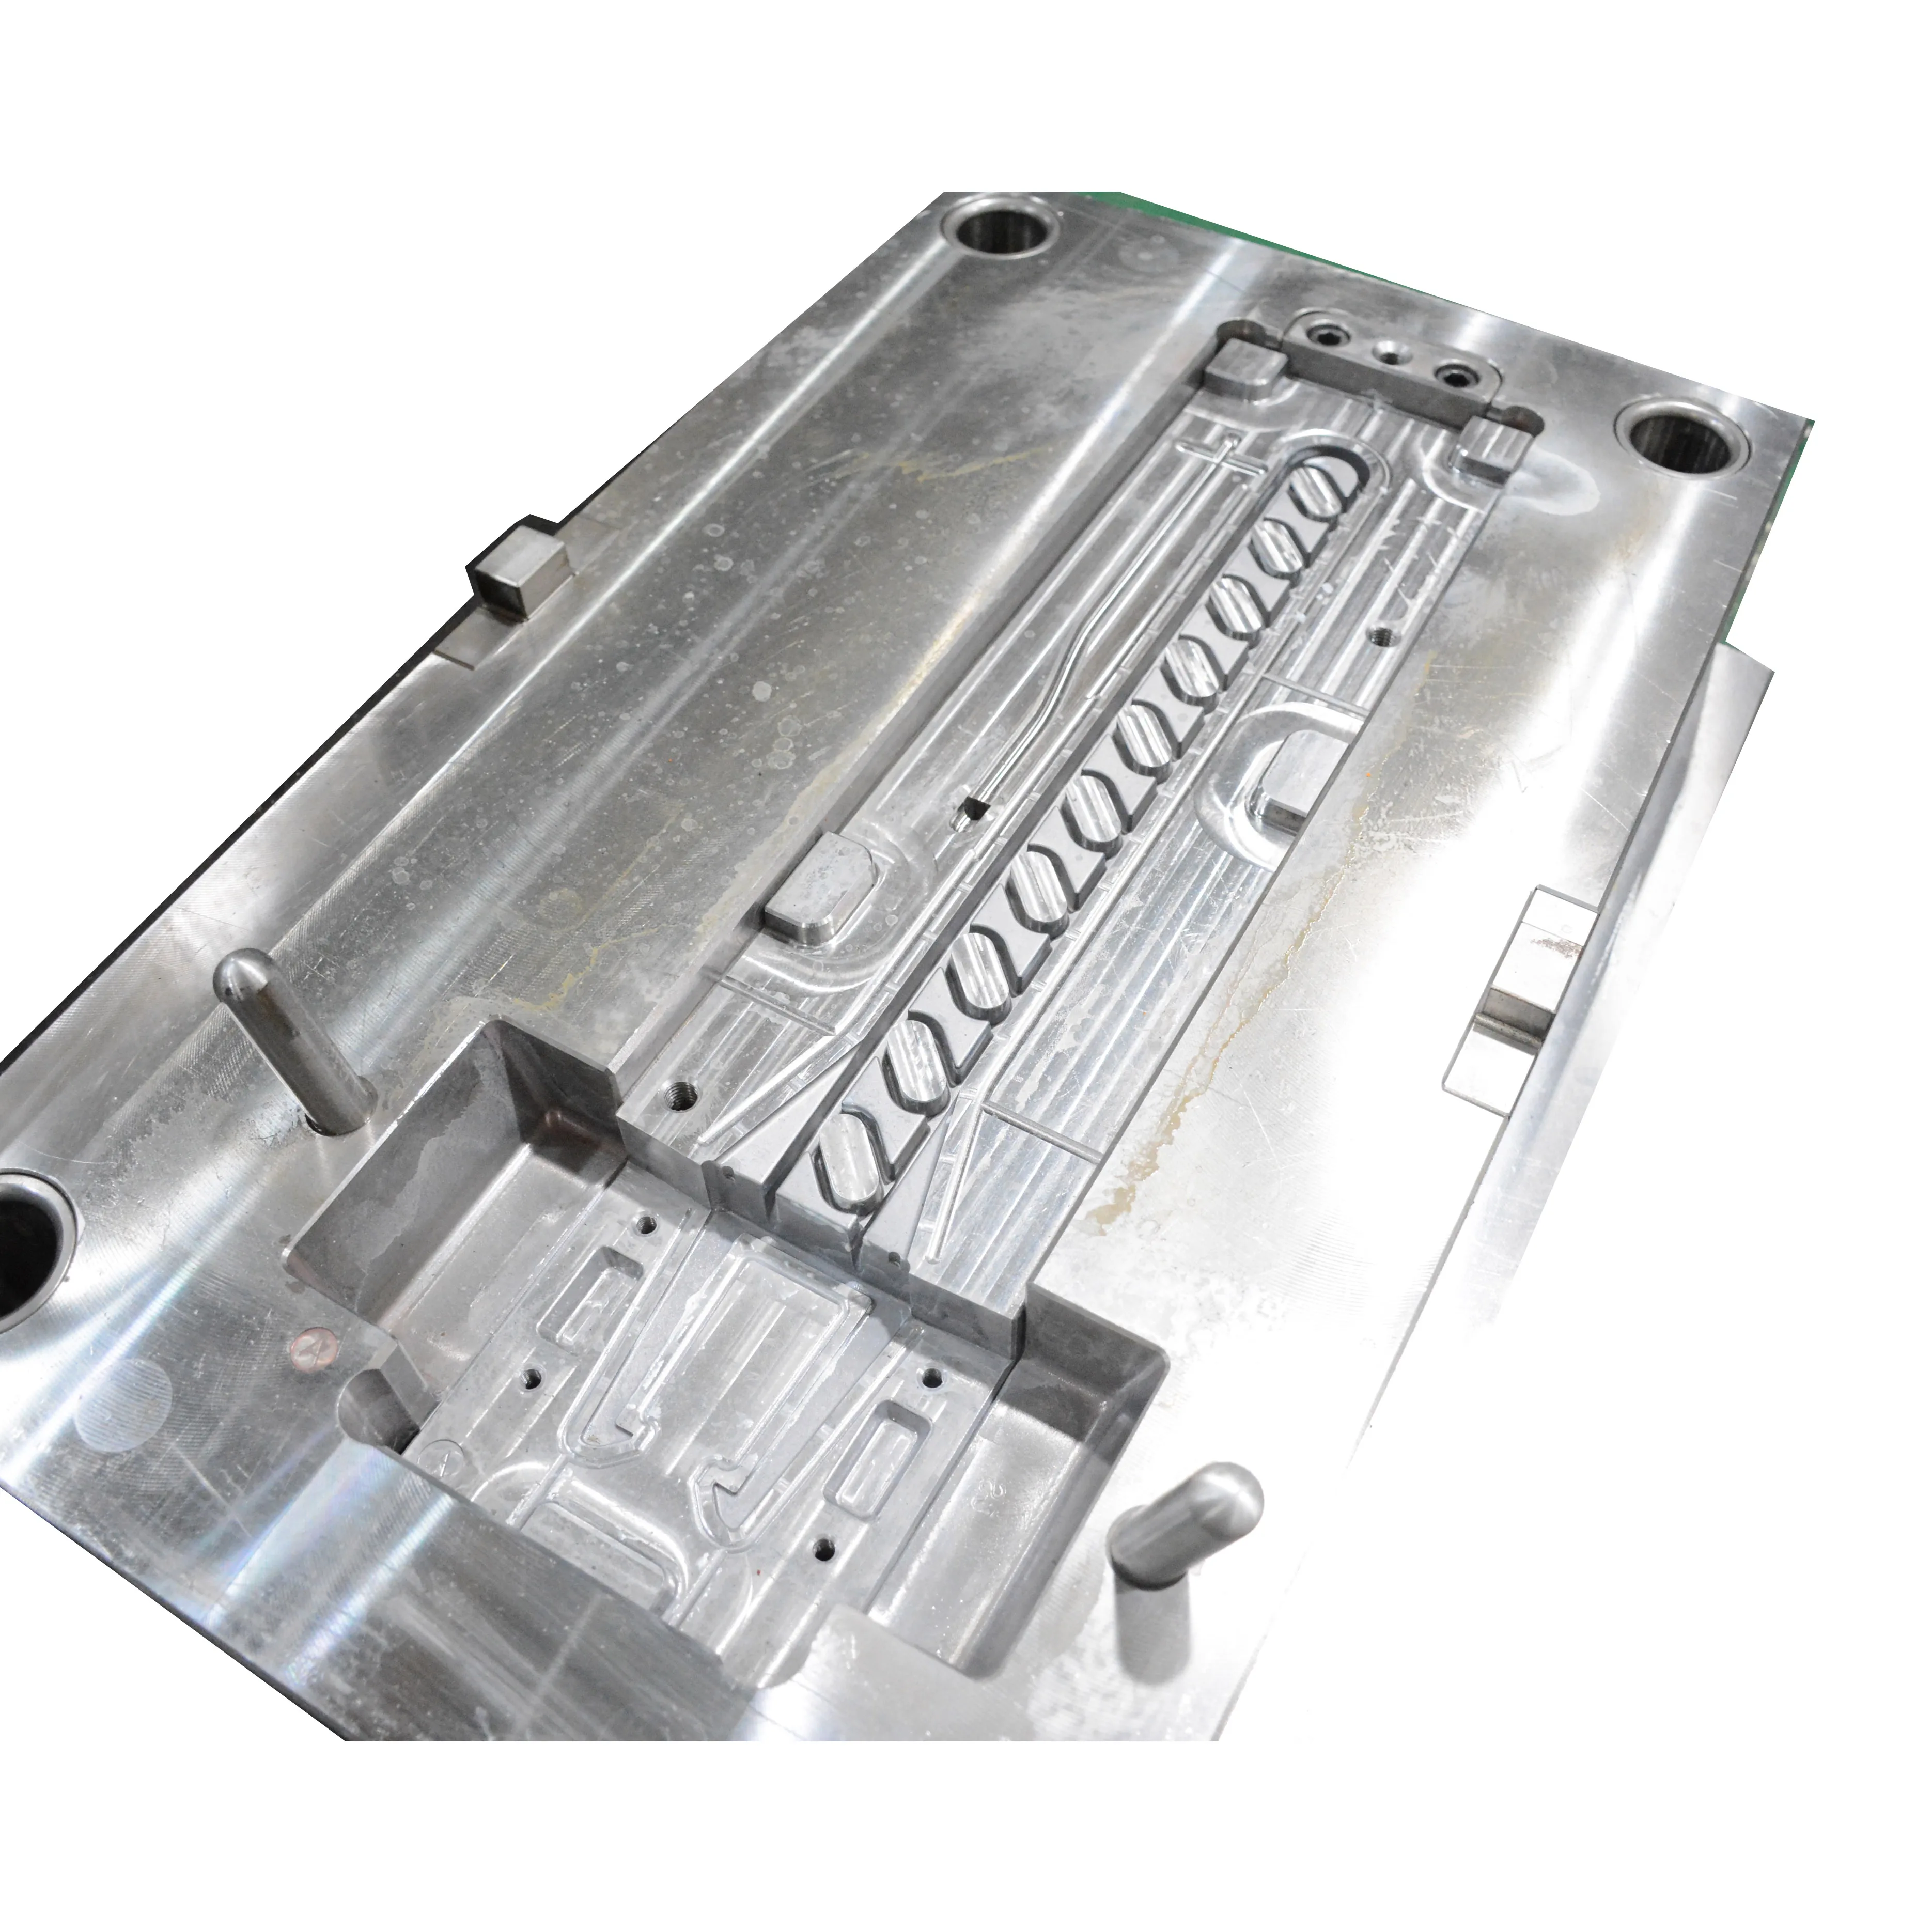 DongGuan Custom Cheap Steel Mould Maker Product Used Abs Acrylic Plastic Injection Molding Parts Service